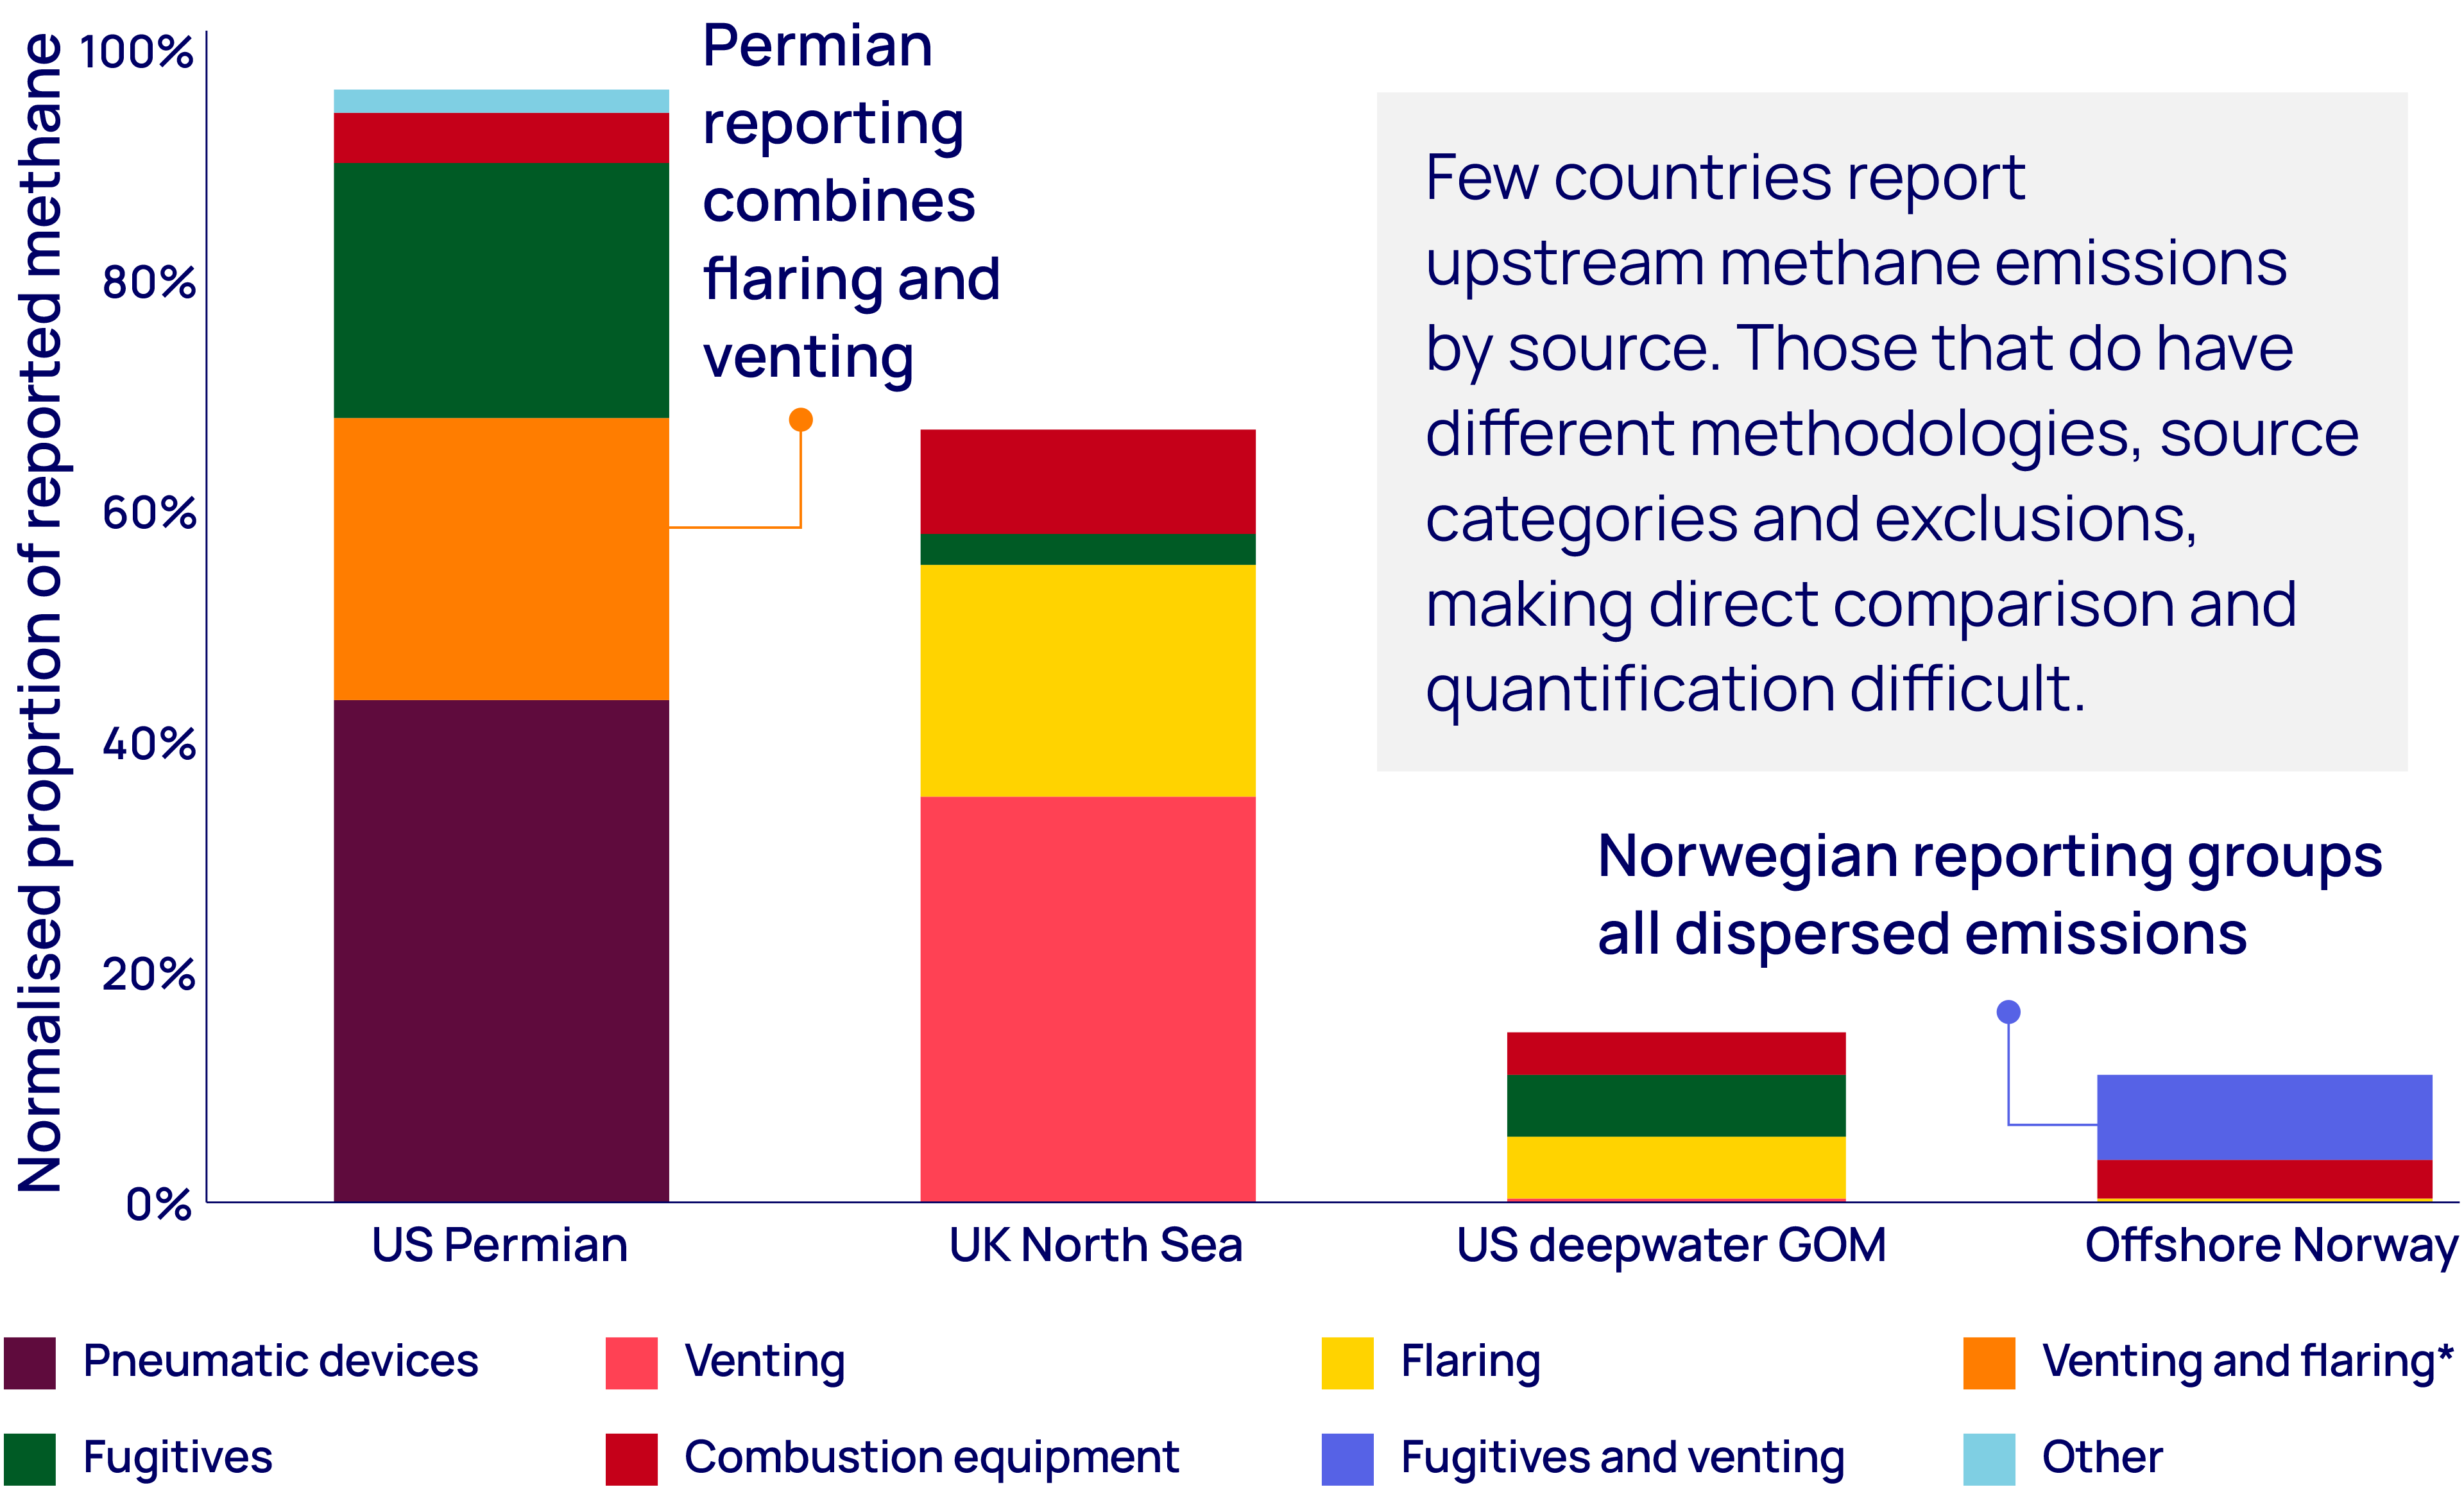 Operational methane emission sources and intensity vary widely by region and asset type 